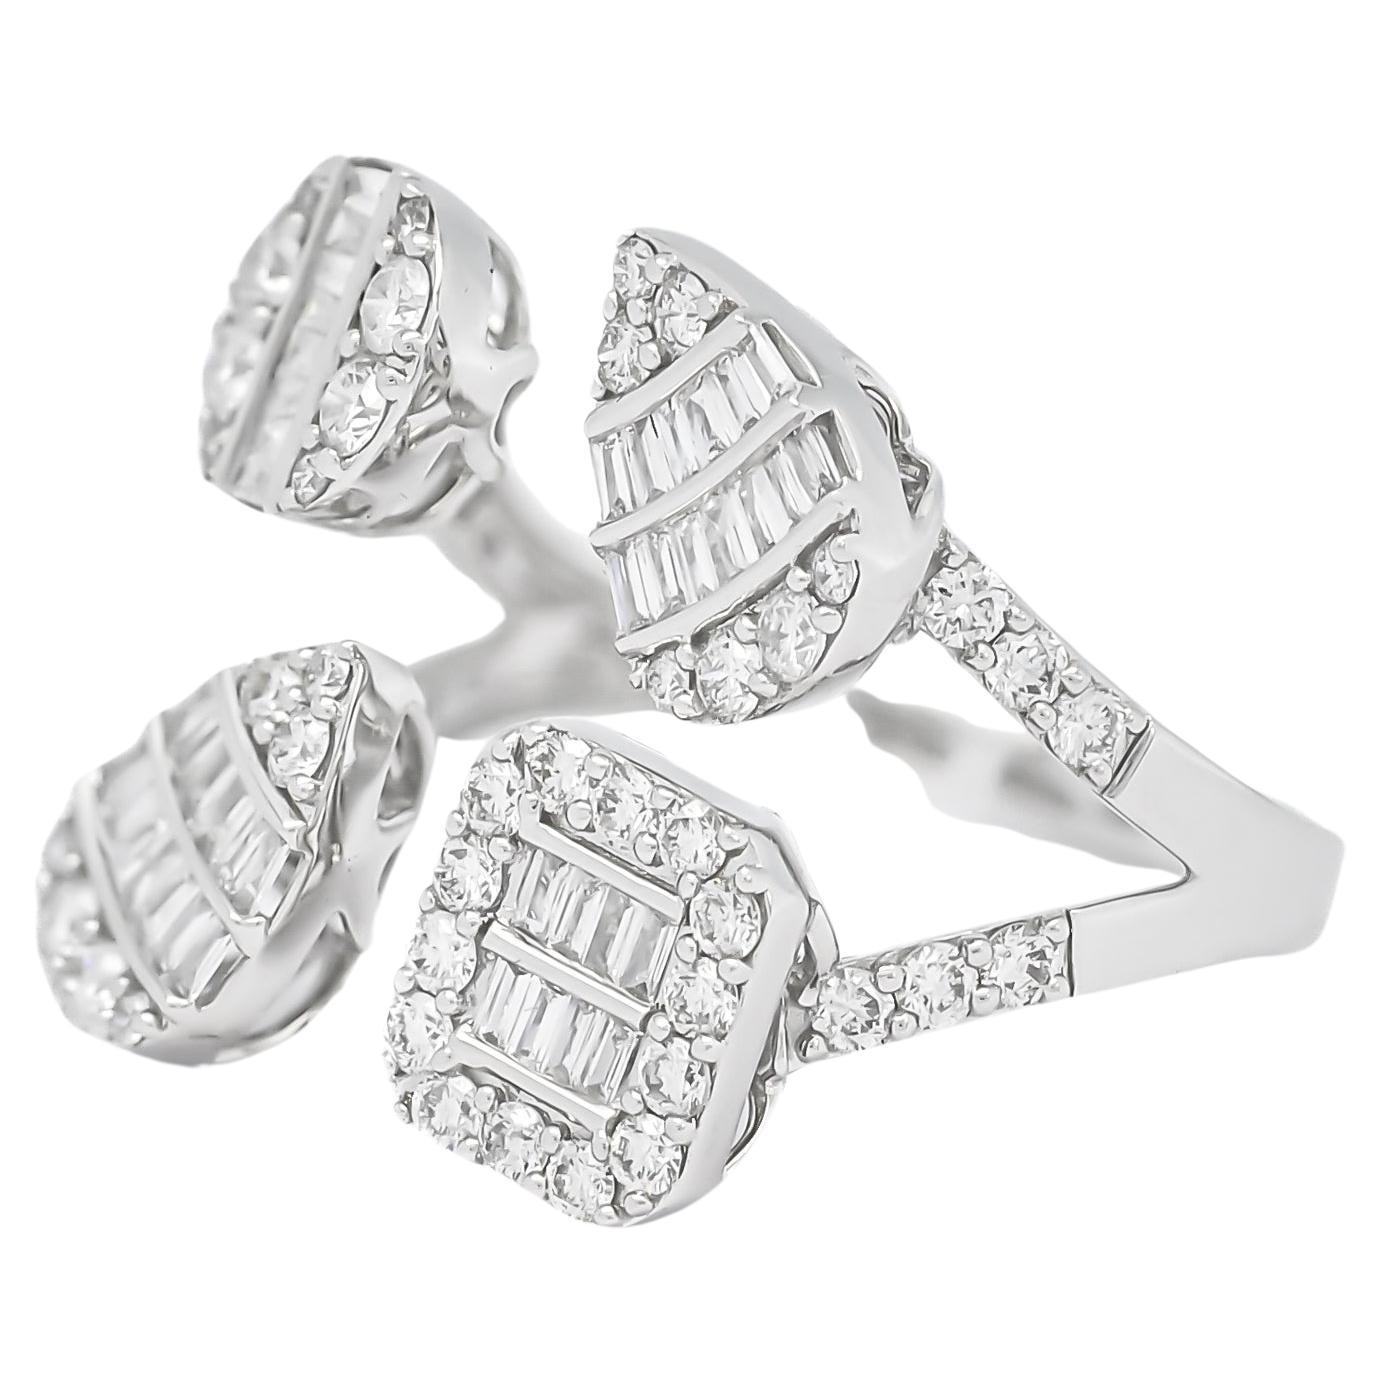 Dazzling round shape diamonds form a spectacular clusters in this stunning white gold 4 cluster ring in 4 shank. The Cluster are in a shape of a Heart, Pear and a Round Diamond, giving an illusion of solitaire Diamonds.

Indulge in the epitome of